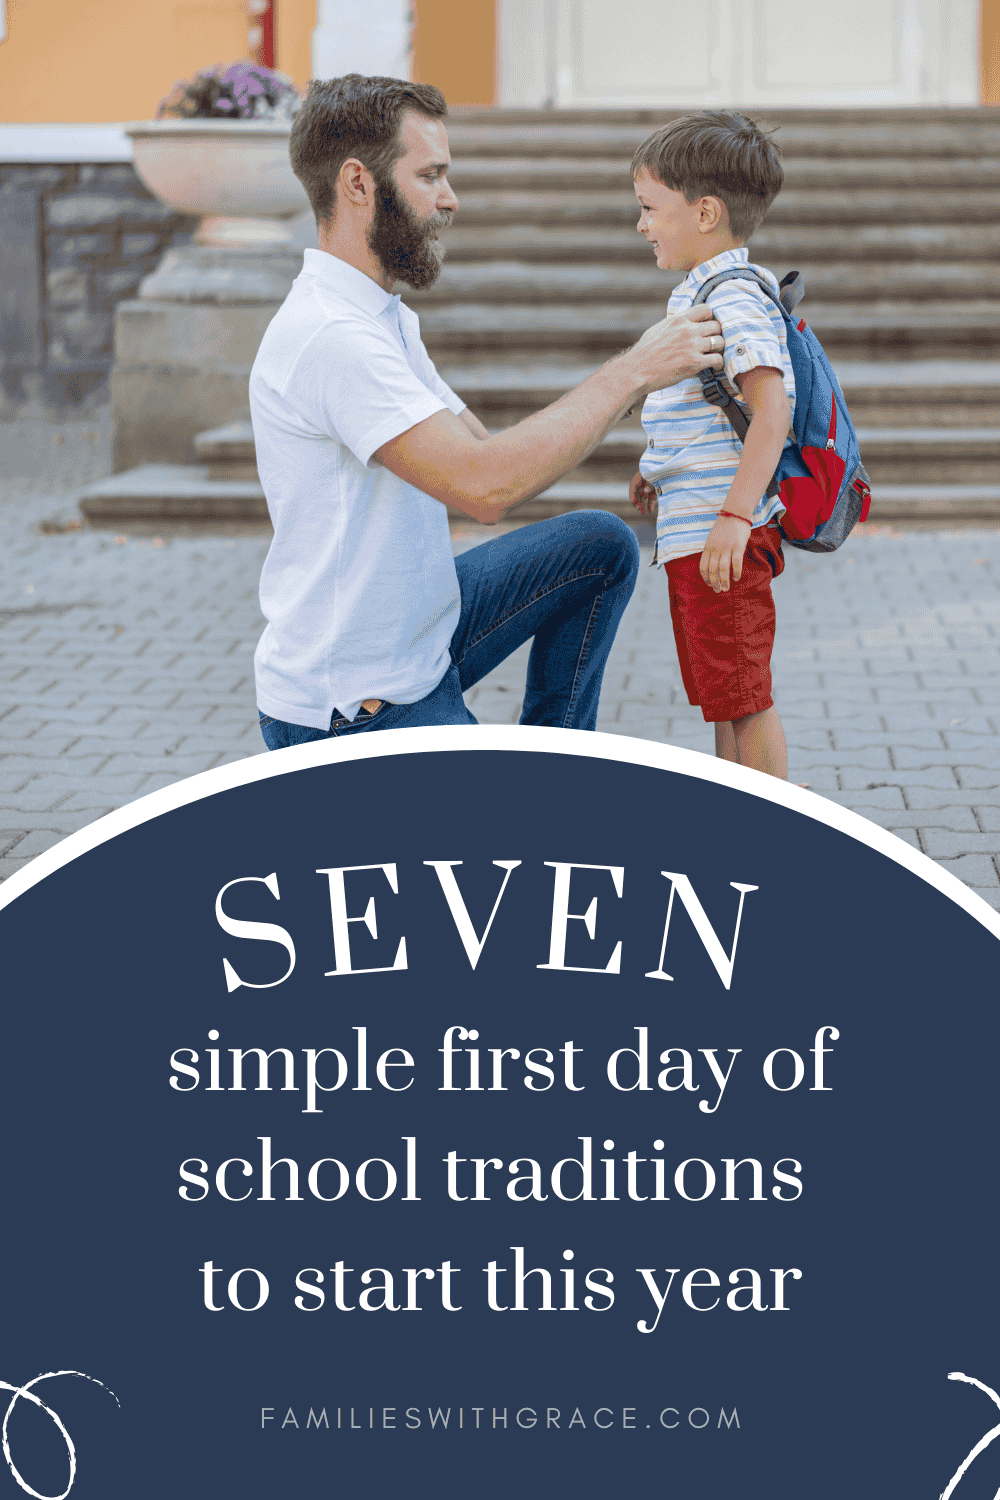 First day of school traditions to start this year